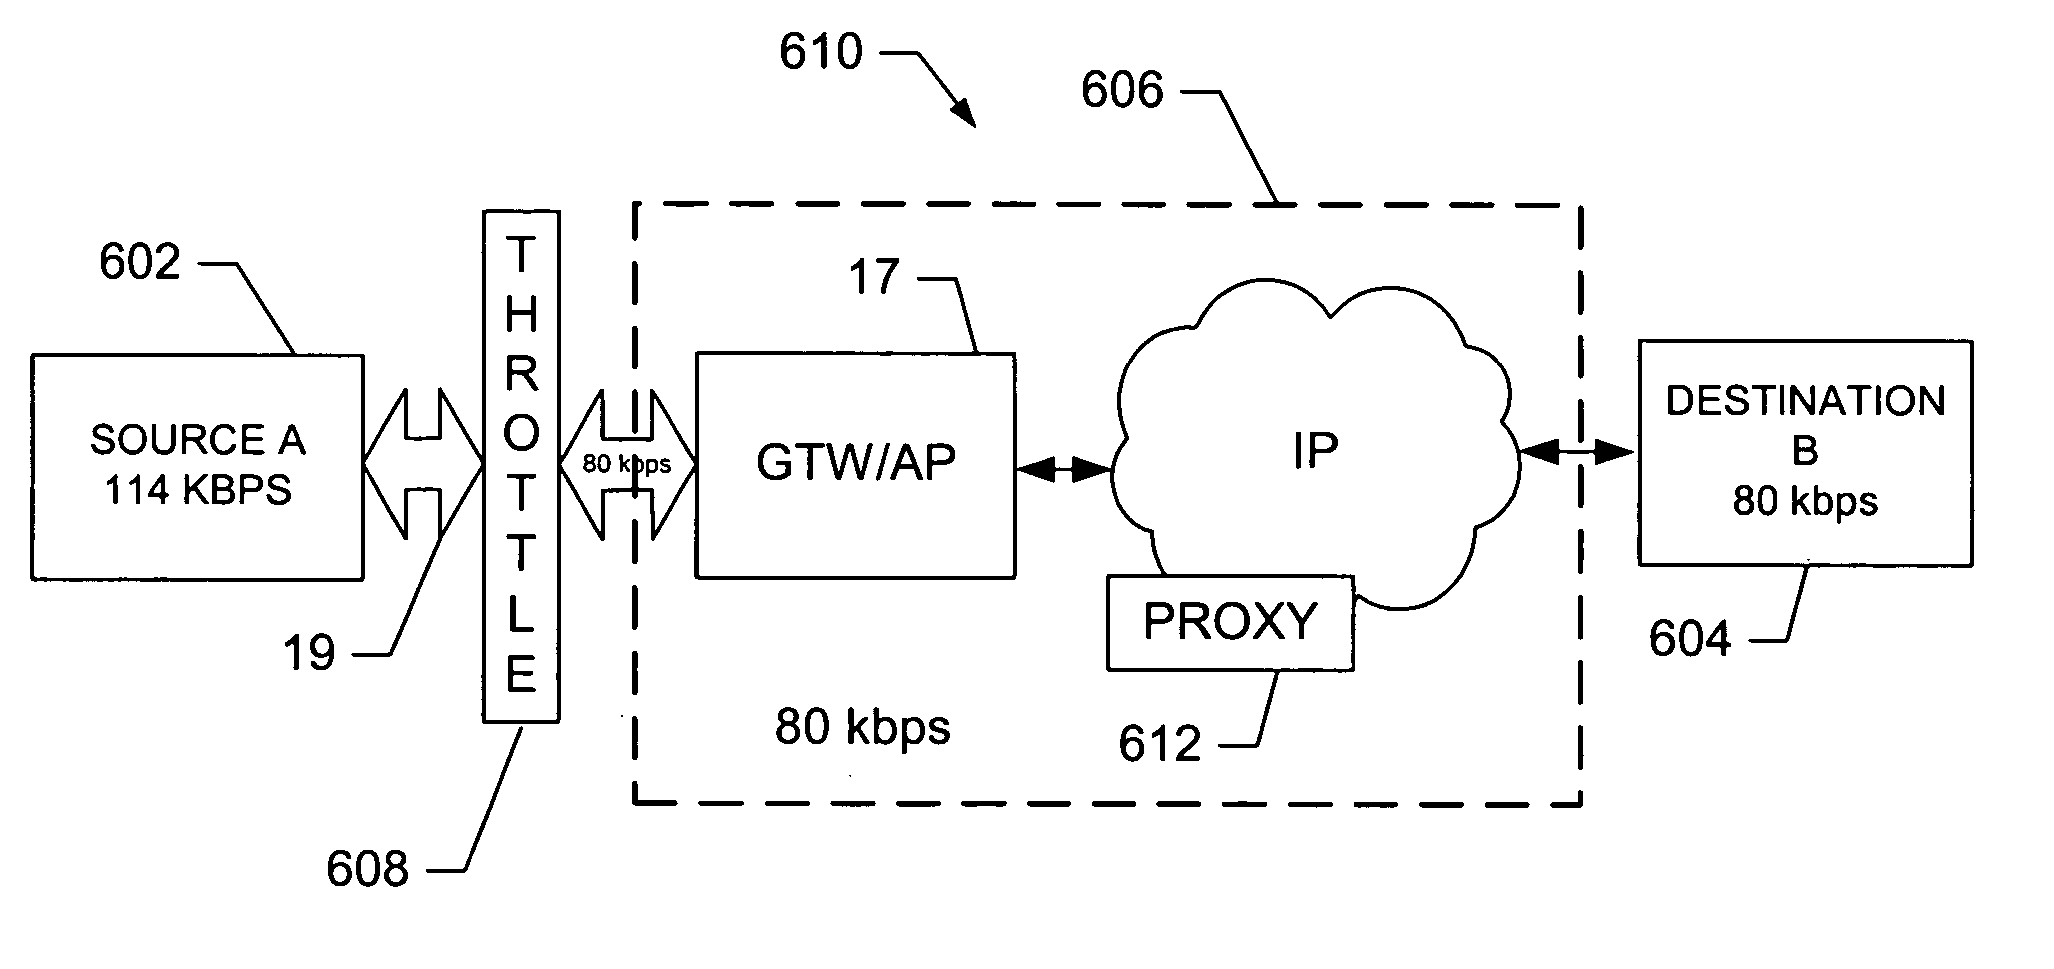 System and method of network congestion control by UDP source throttling